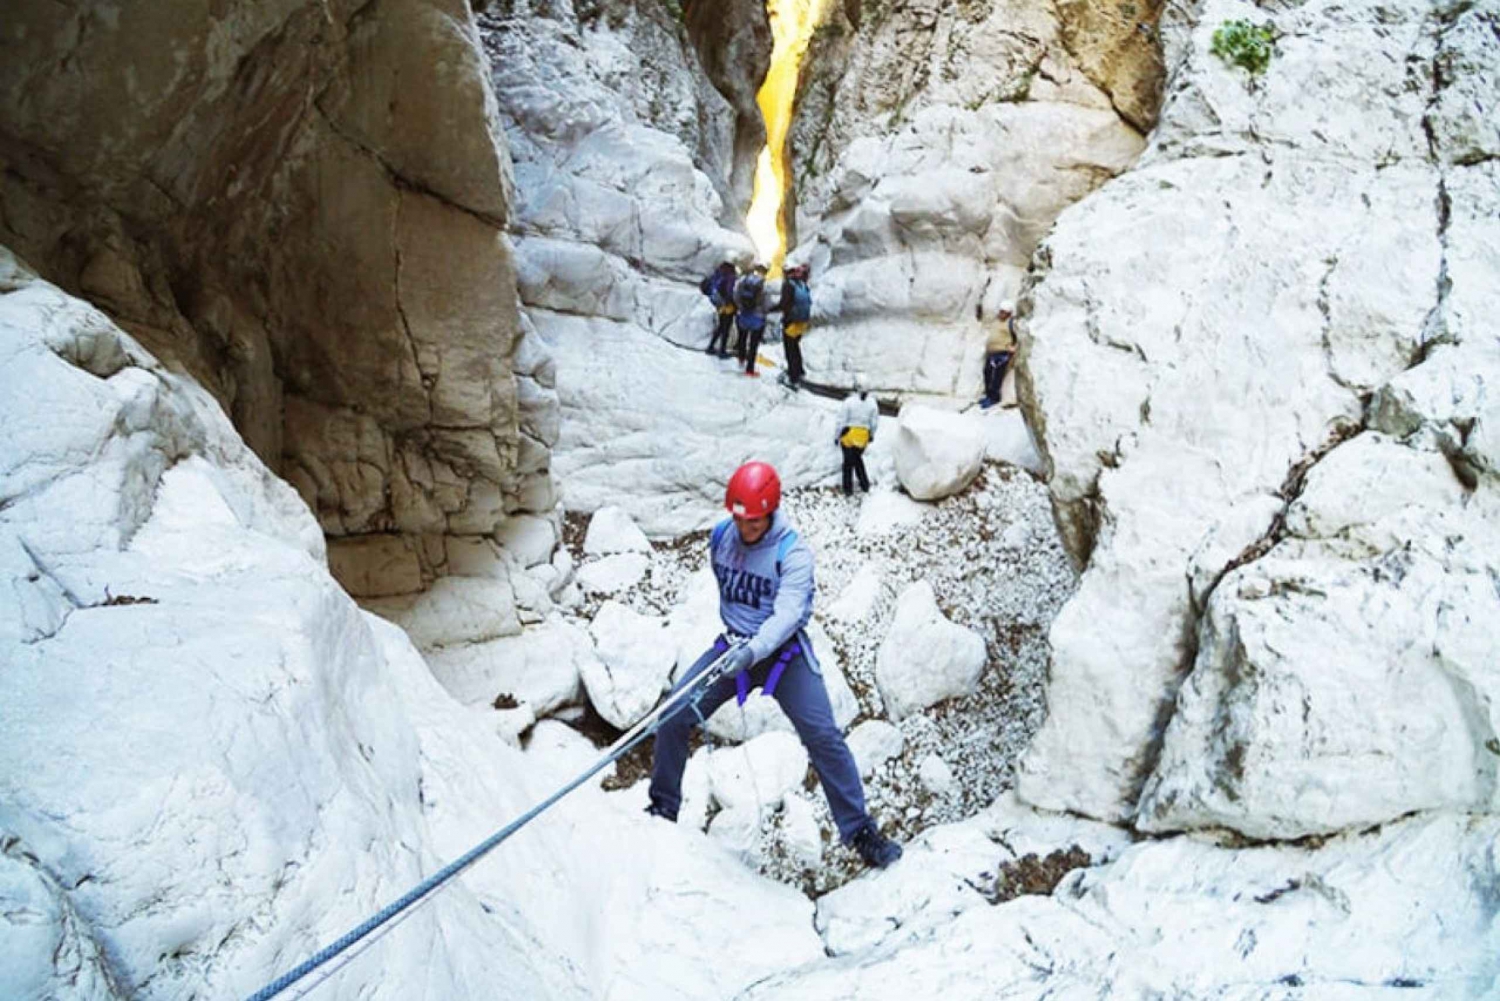 Alicante: Guided Canyoning Experience in The Ravine of Hell